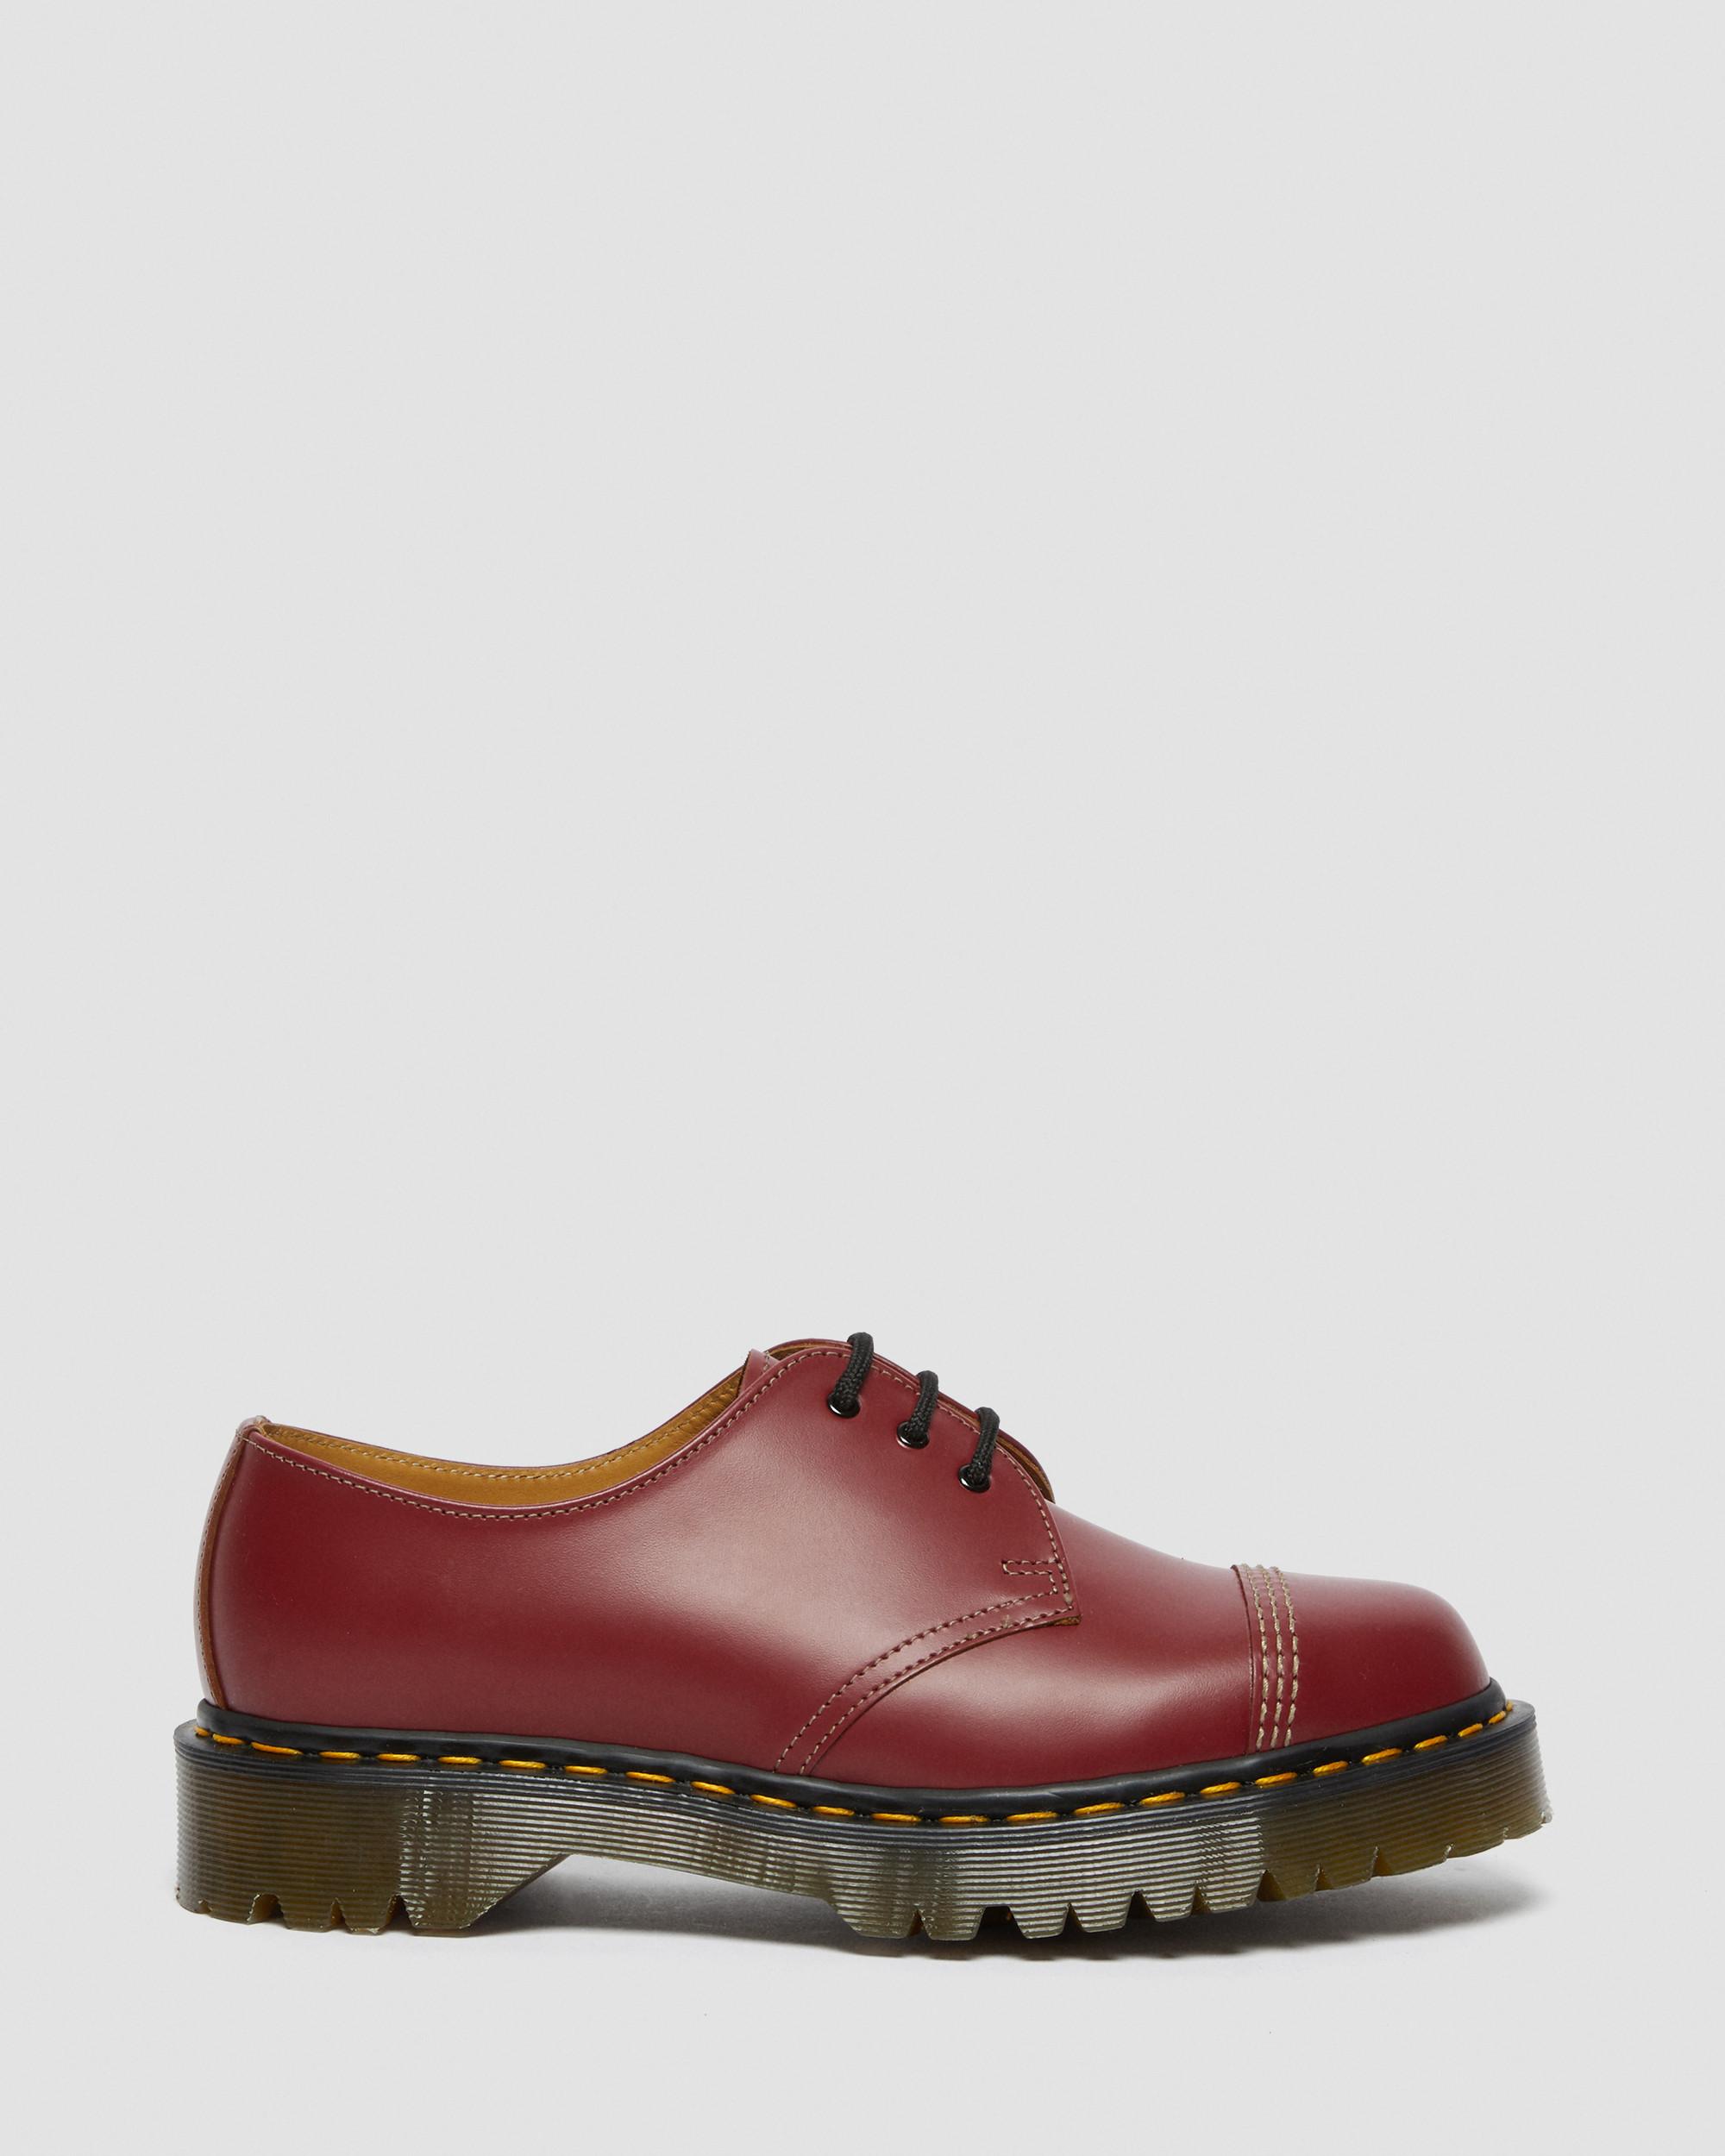 Chaussures 1461 Bex Toe CapChaussures 1461 Bex Toe Cap Made in England Dr. Martens